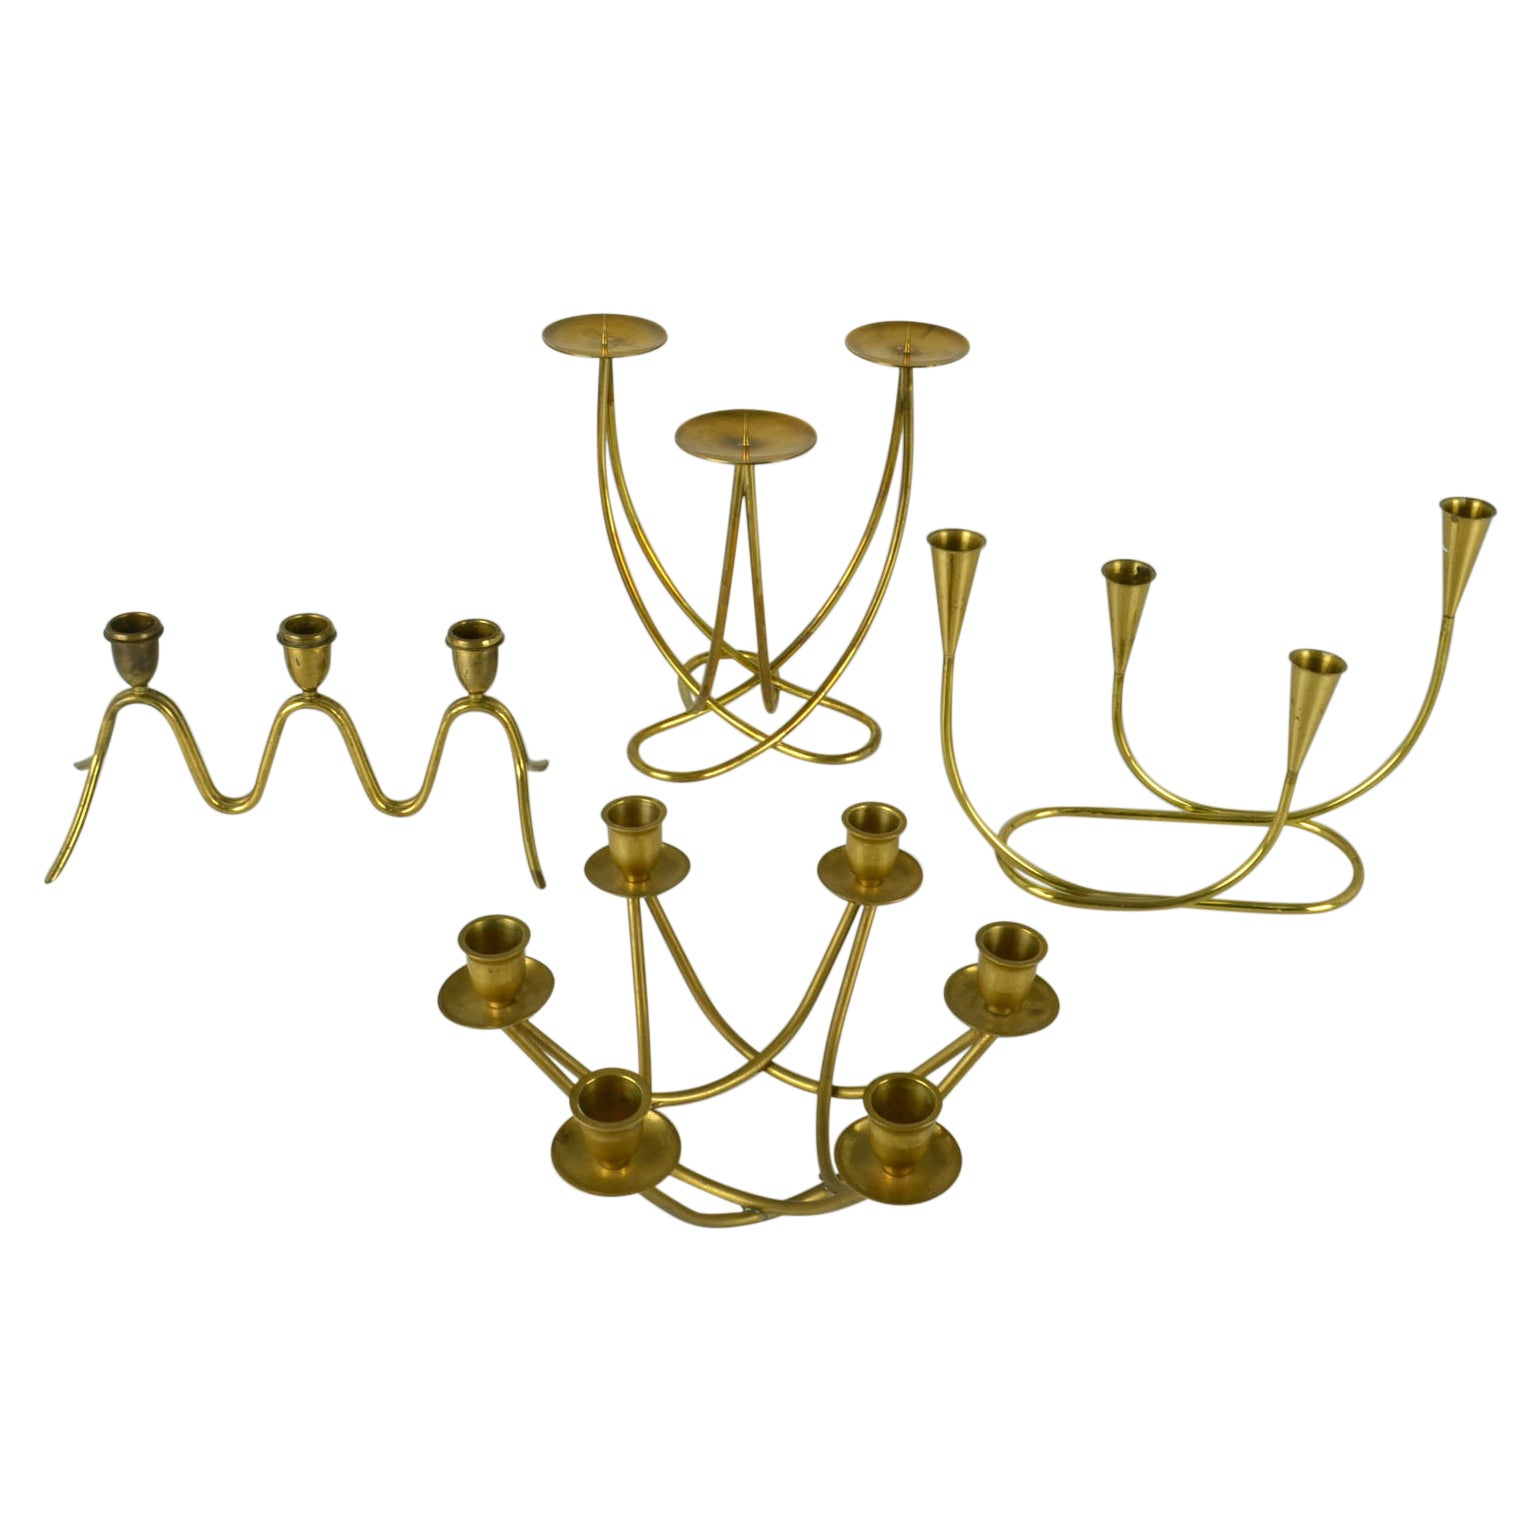 Group of Mid-Century Modern Brass Candelabras For Sale